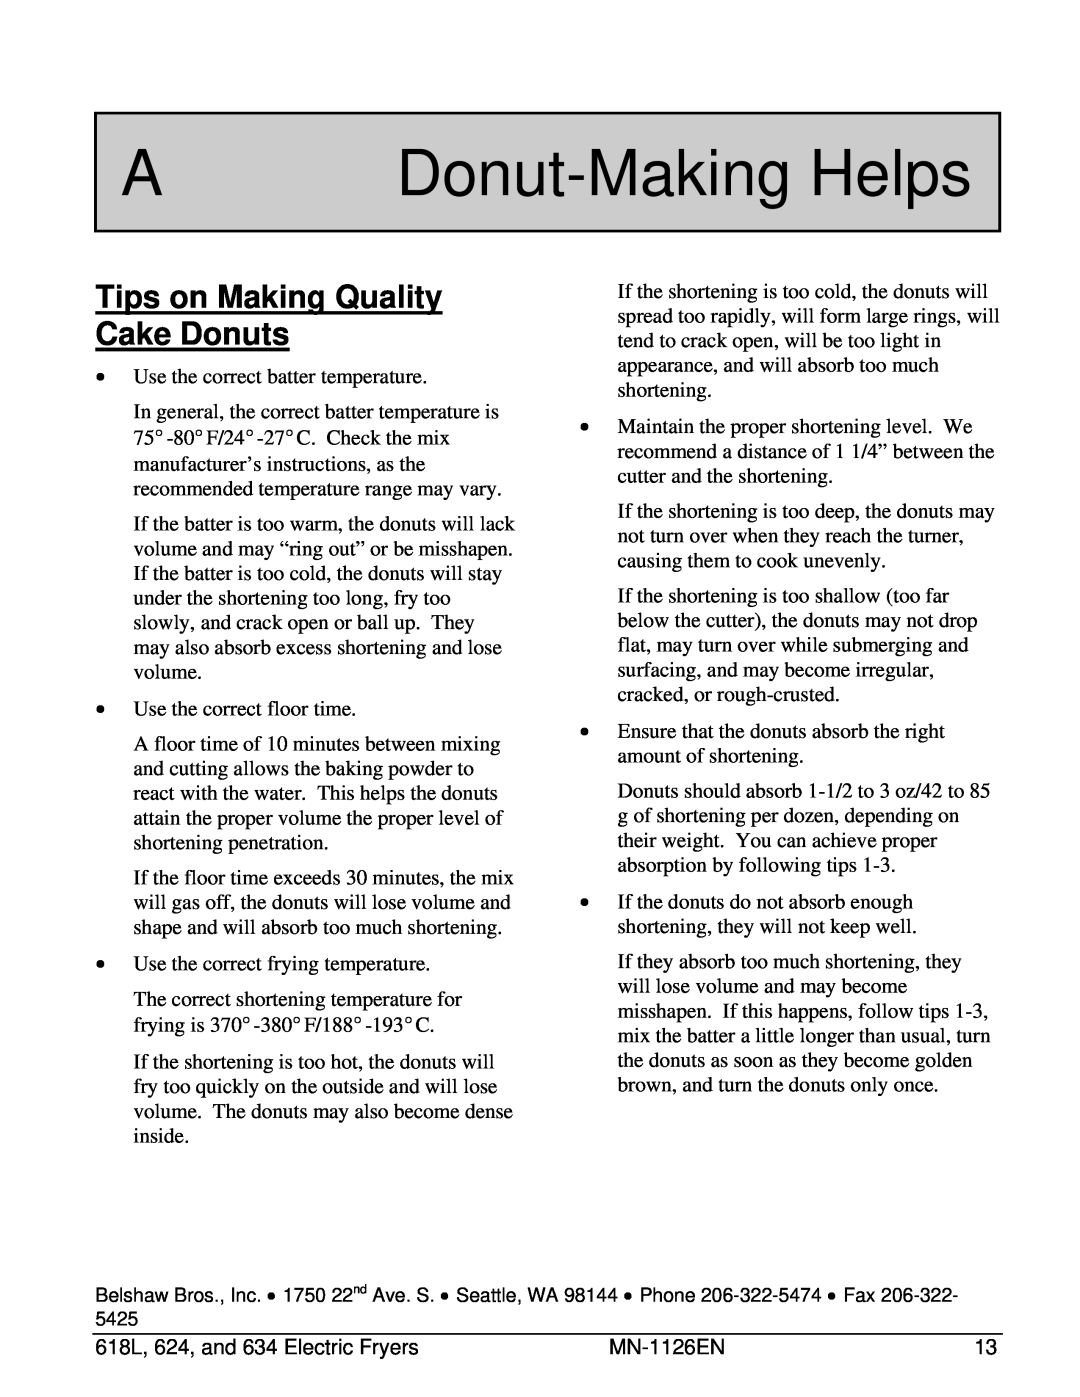 Belshaw Brothers 618L, 624, 634 manual A Donut-Making Helps, Tips on Making Quality Cake Donuts 